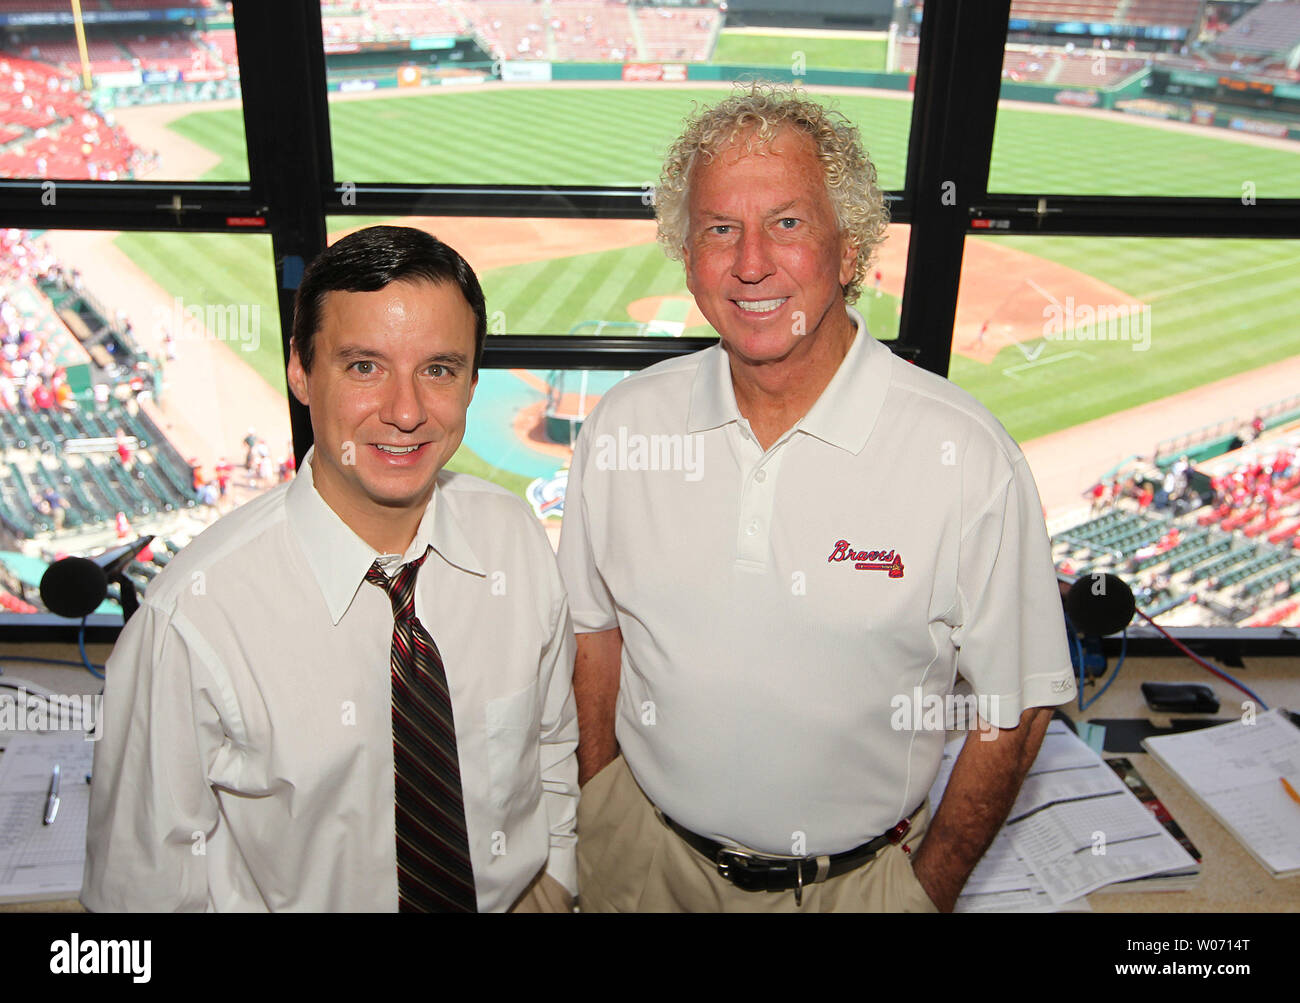 Atlanta Braves radio announcers Jim Powell (L) and National Baseball Hall of Fame member Don Sutton, pose for a photograph before a game between the Atlanta Braves and the St